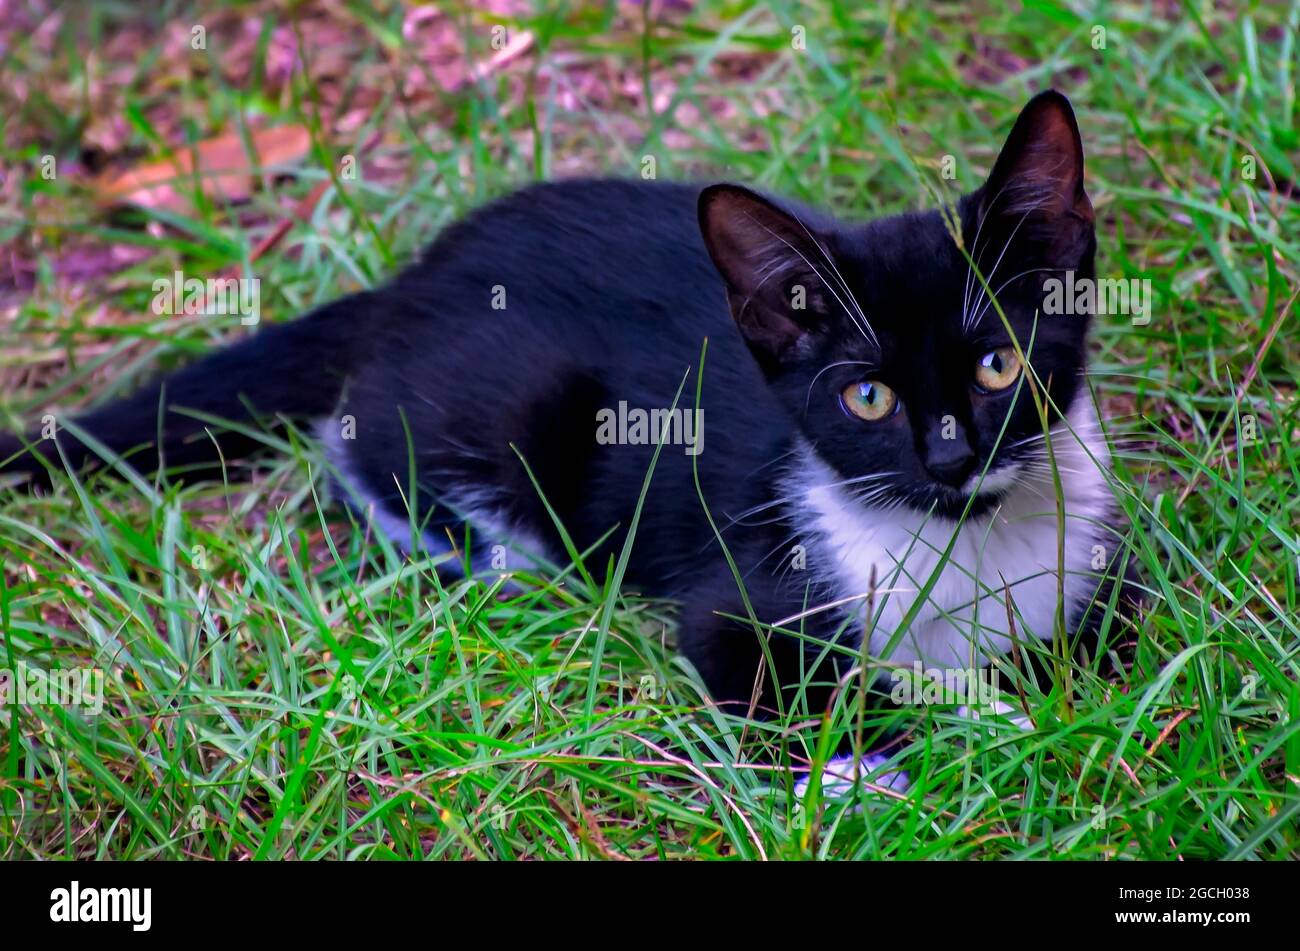 Fancy, a black and white tuxedo kitten, plays in the grass, Aug. 8, 2021. Tuxedo cats are named for their black and white color pattern. Stock Photo